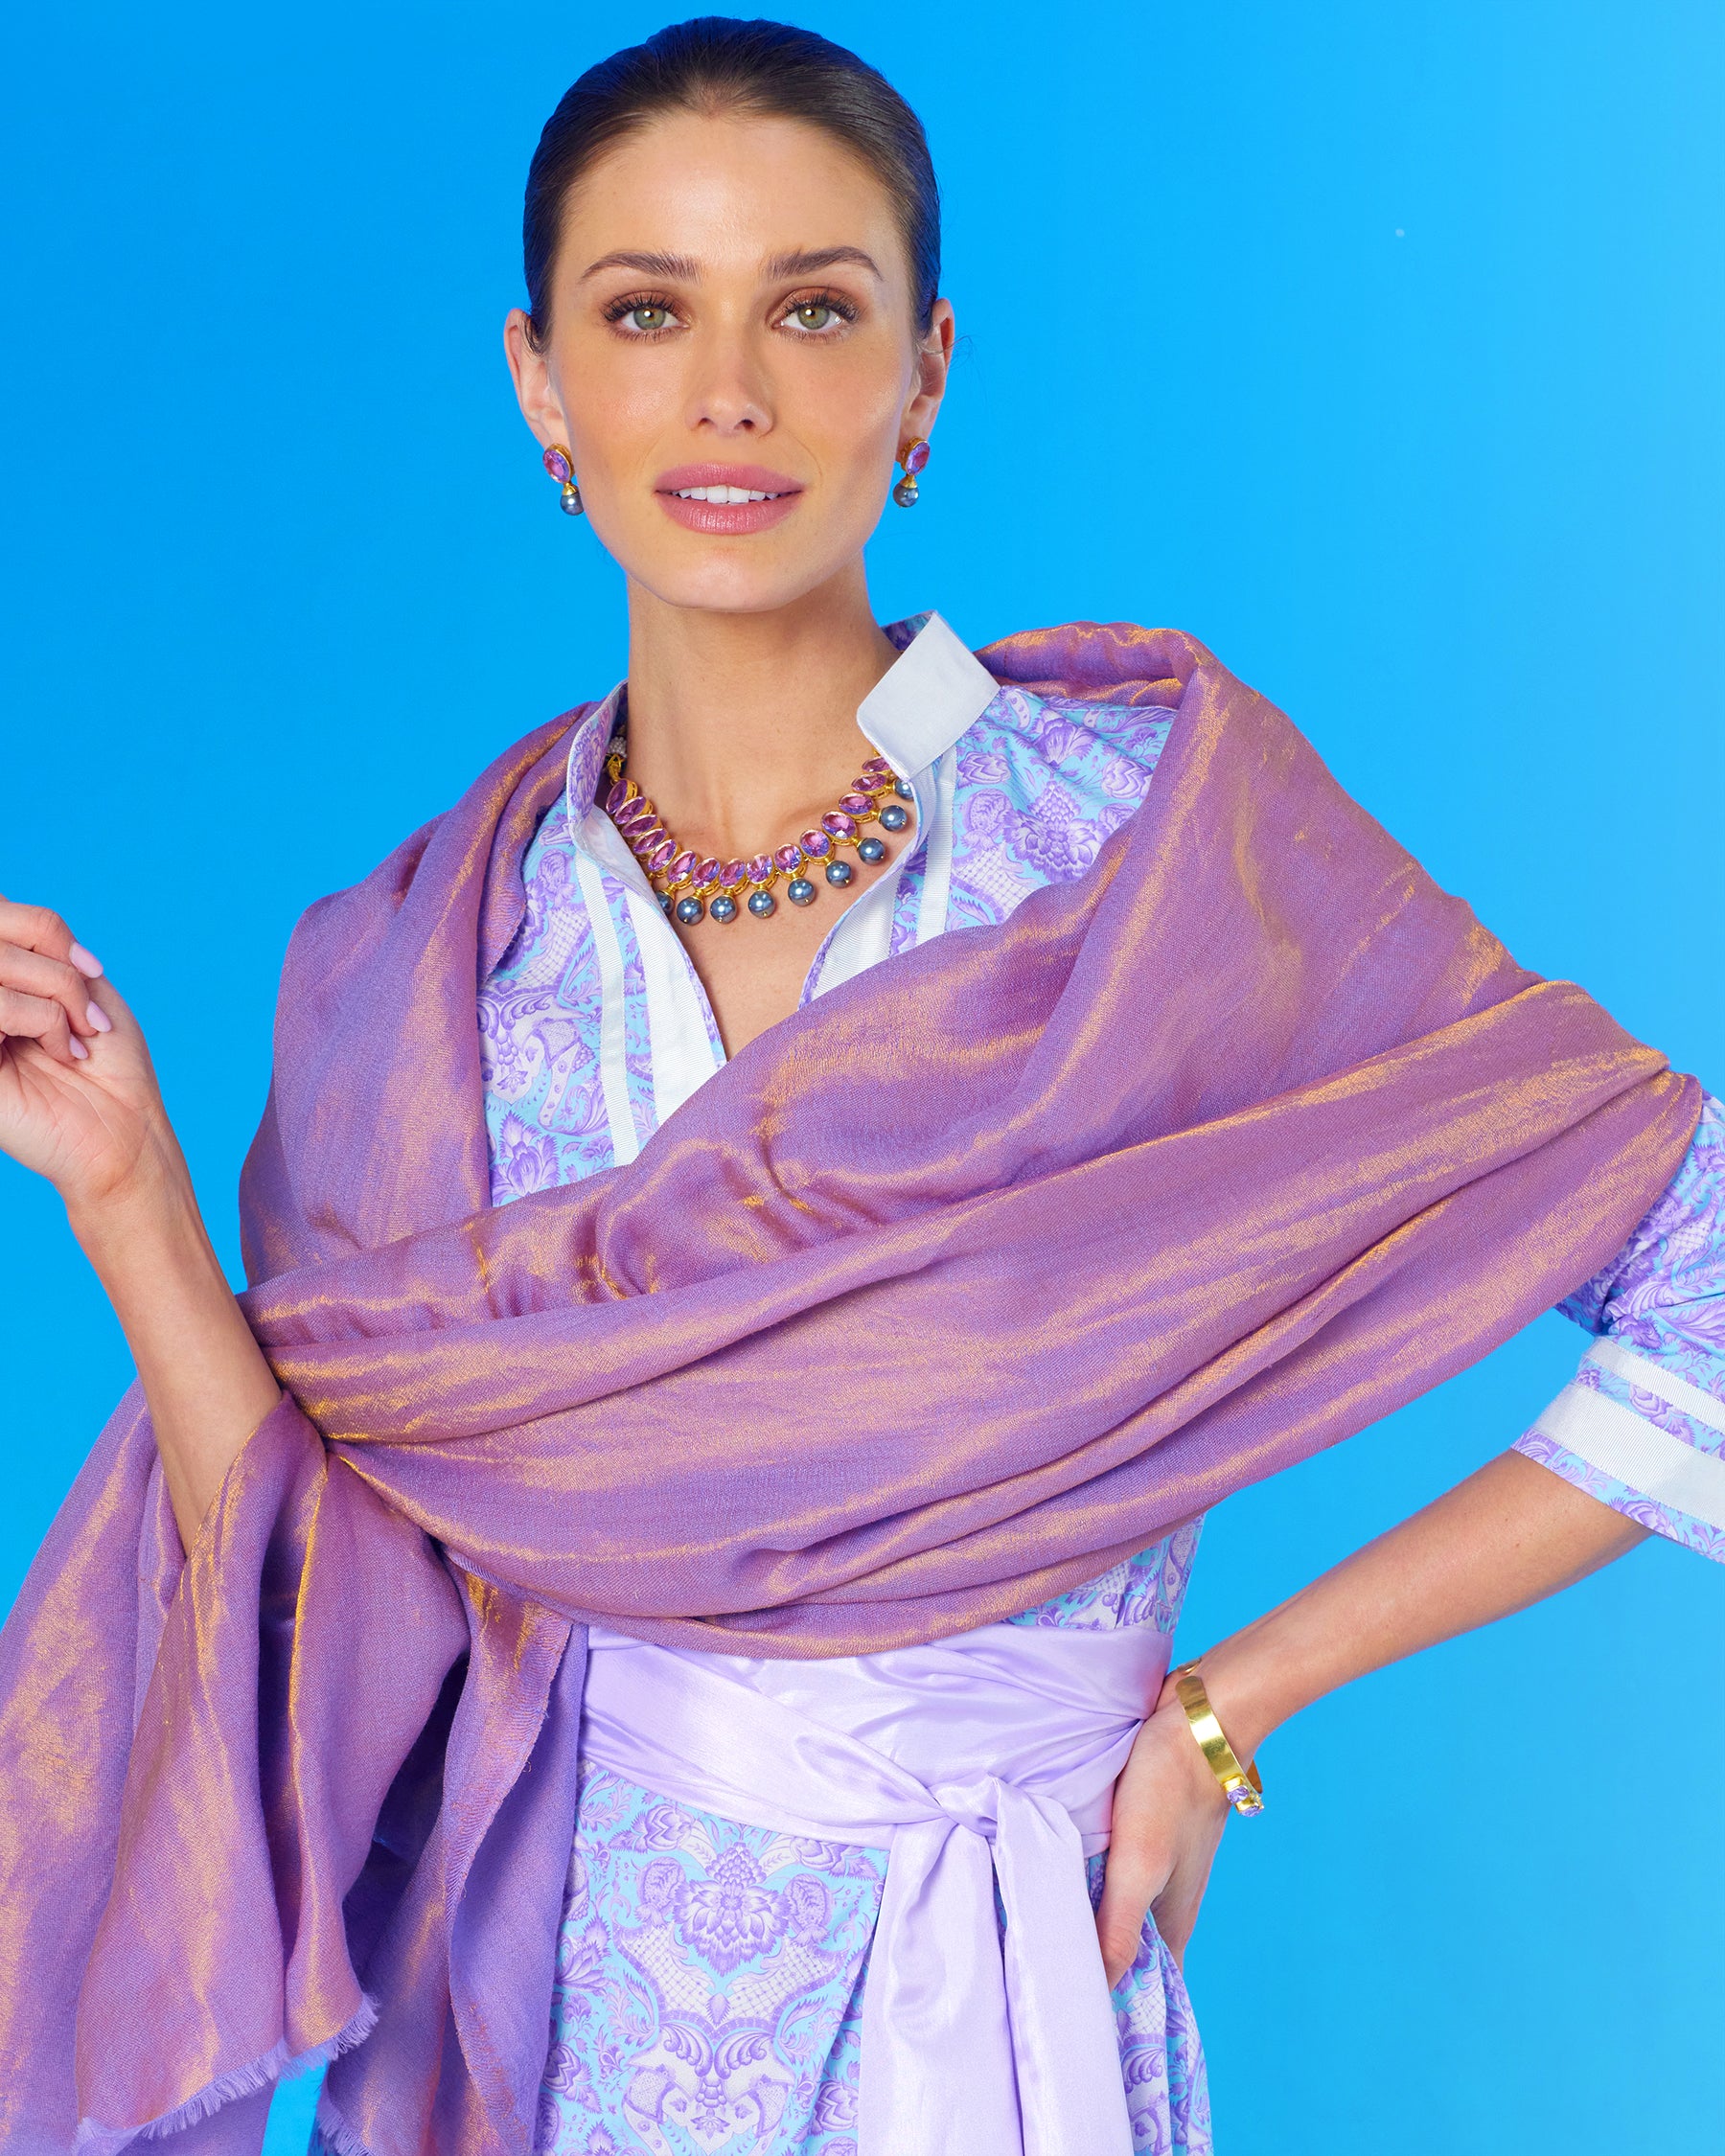 Josephine Reversible Pashmina Shawl in Gold Shimmer Lavender worn with the Capri Long Tunic Dress in Lavender Shalimar